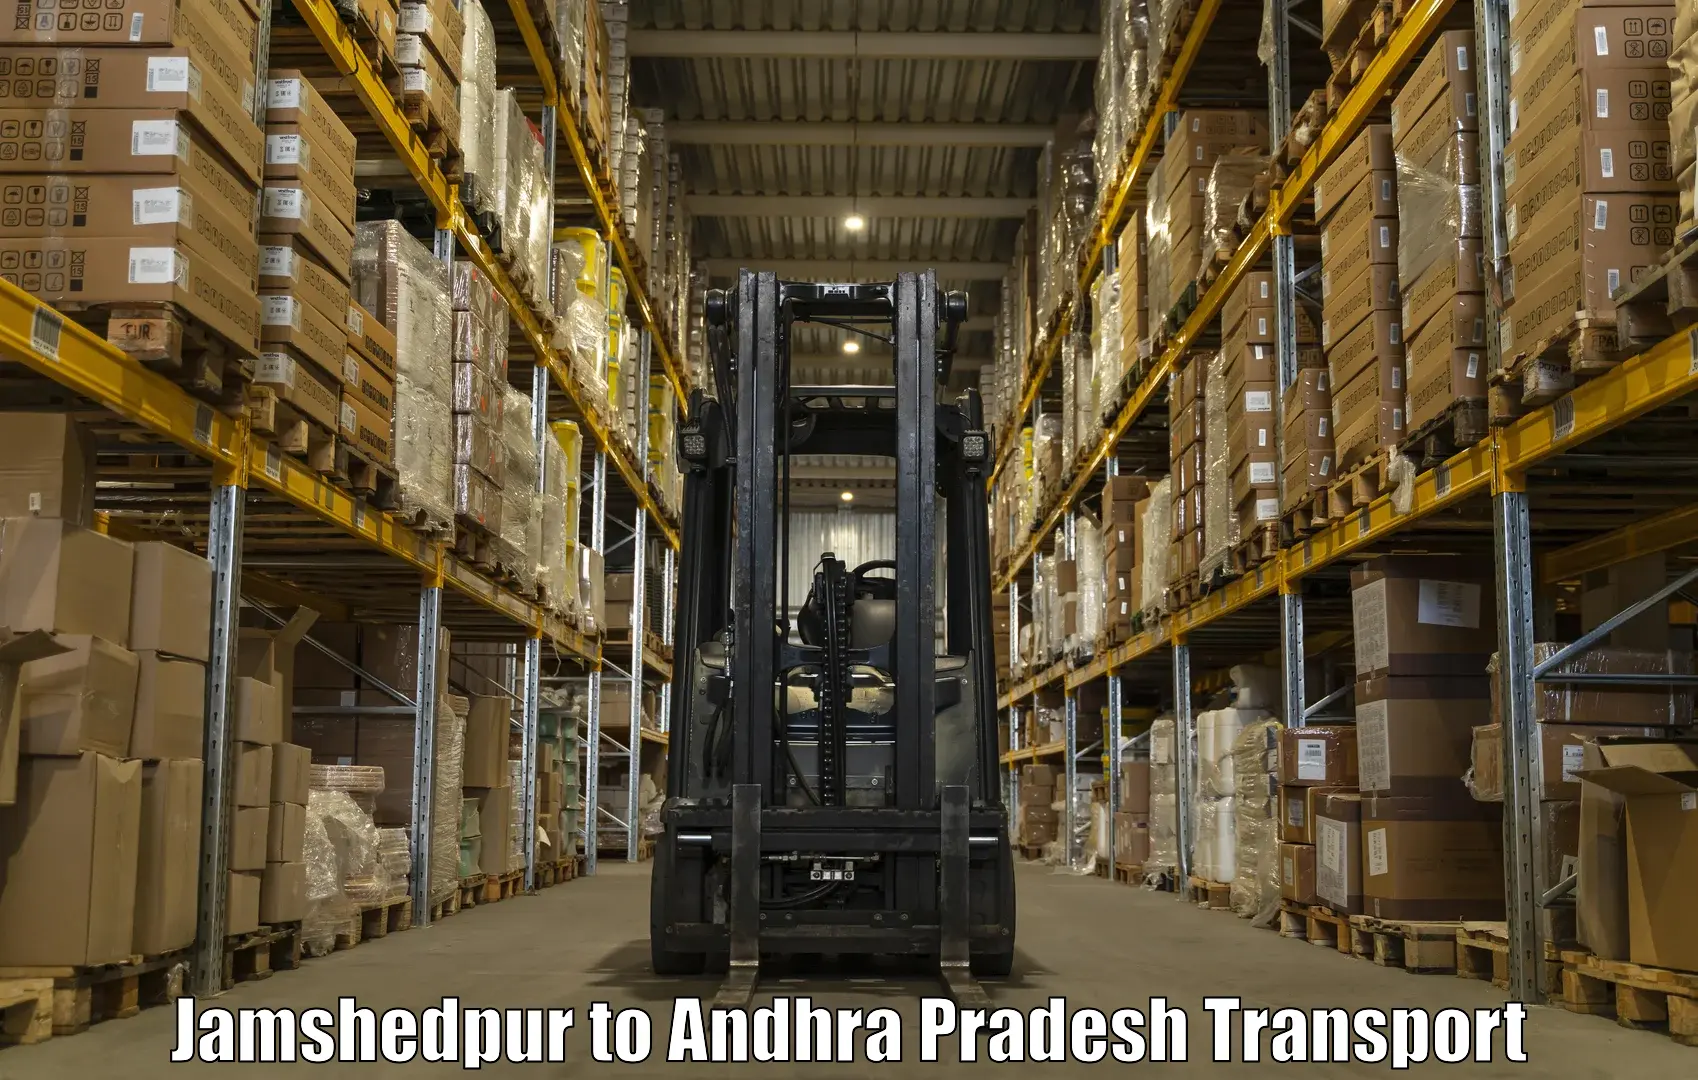 Transport shared services in Jamshedpur to Nallajerla